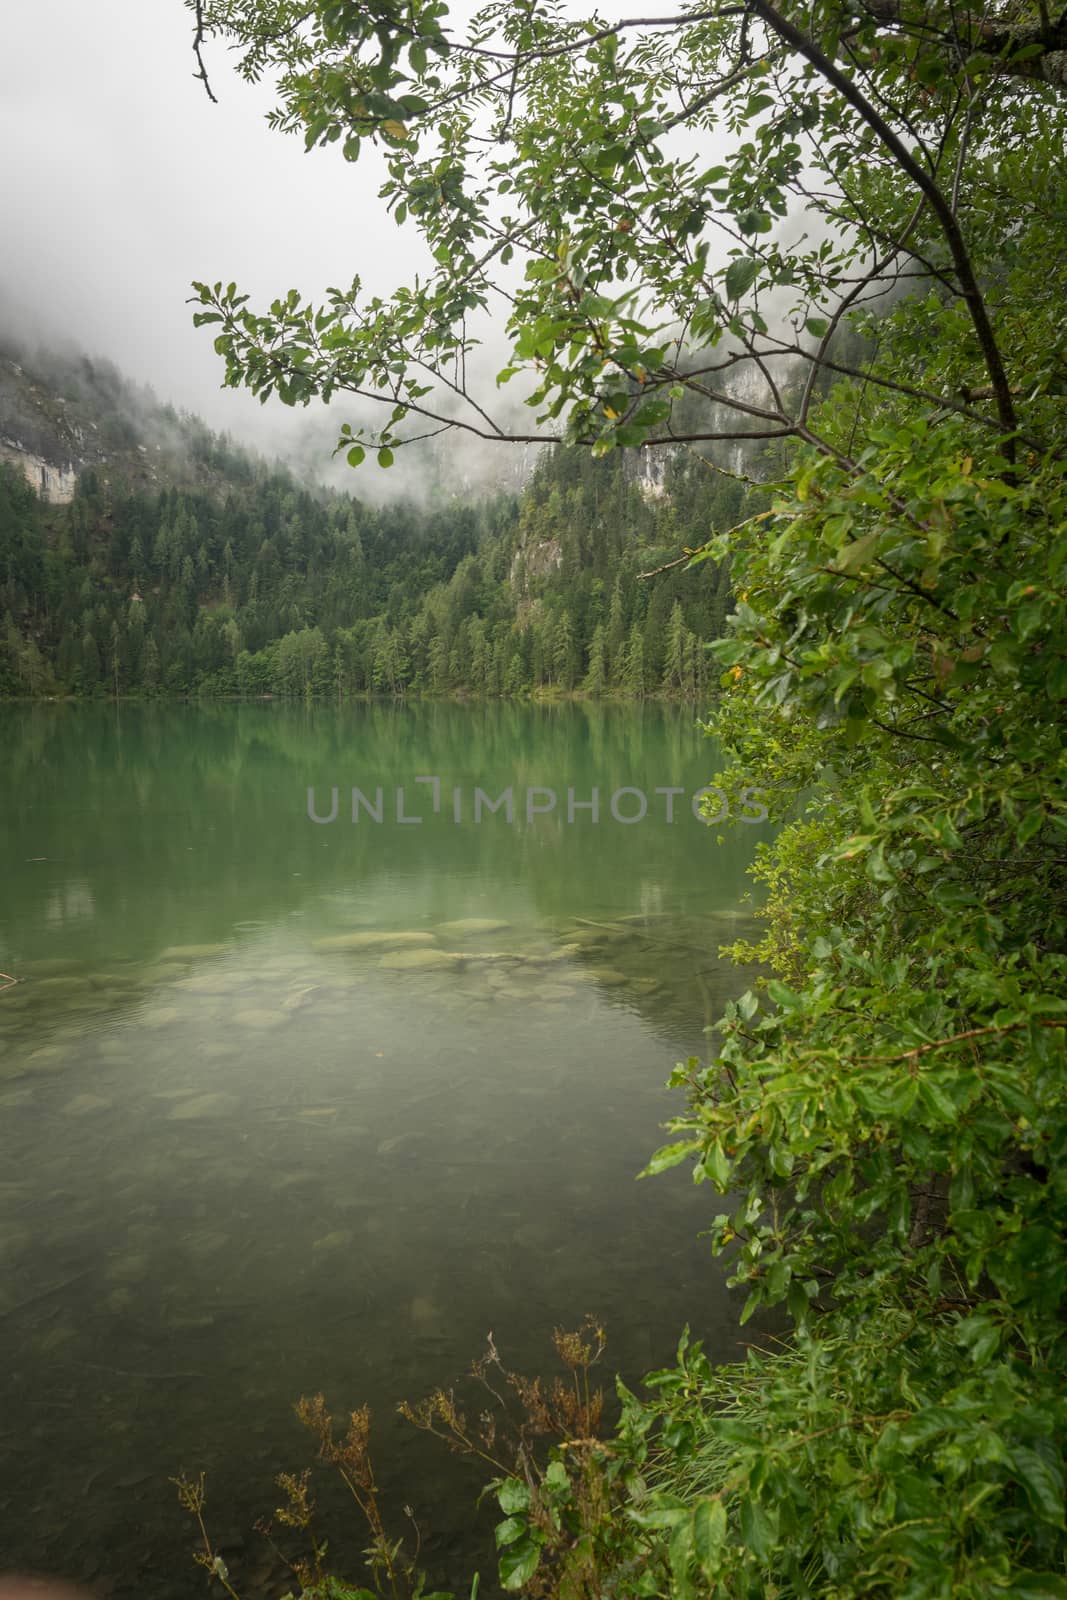 Nature shot at the Gleinkersee in Austria by sandra_fotodesign